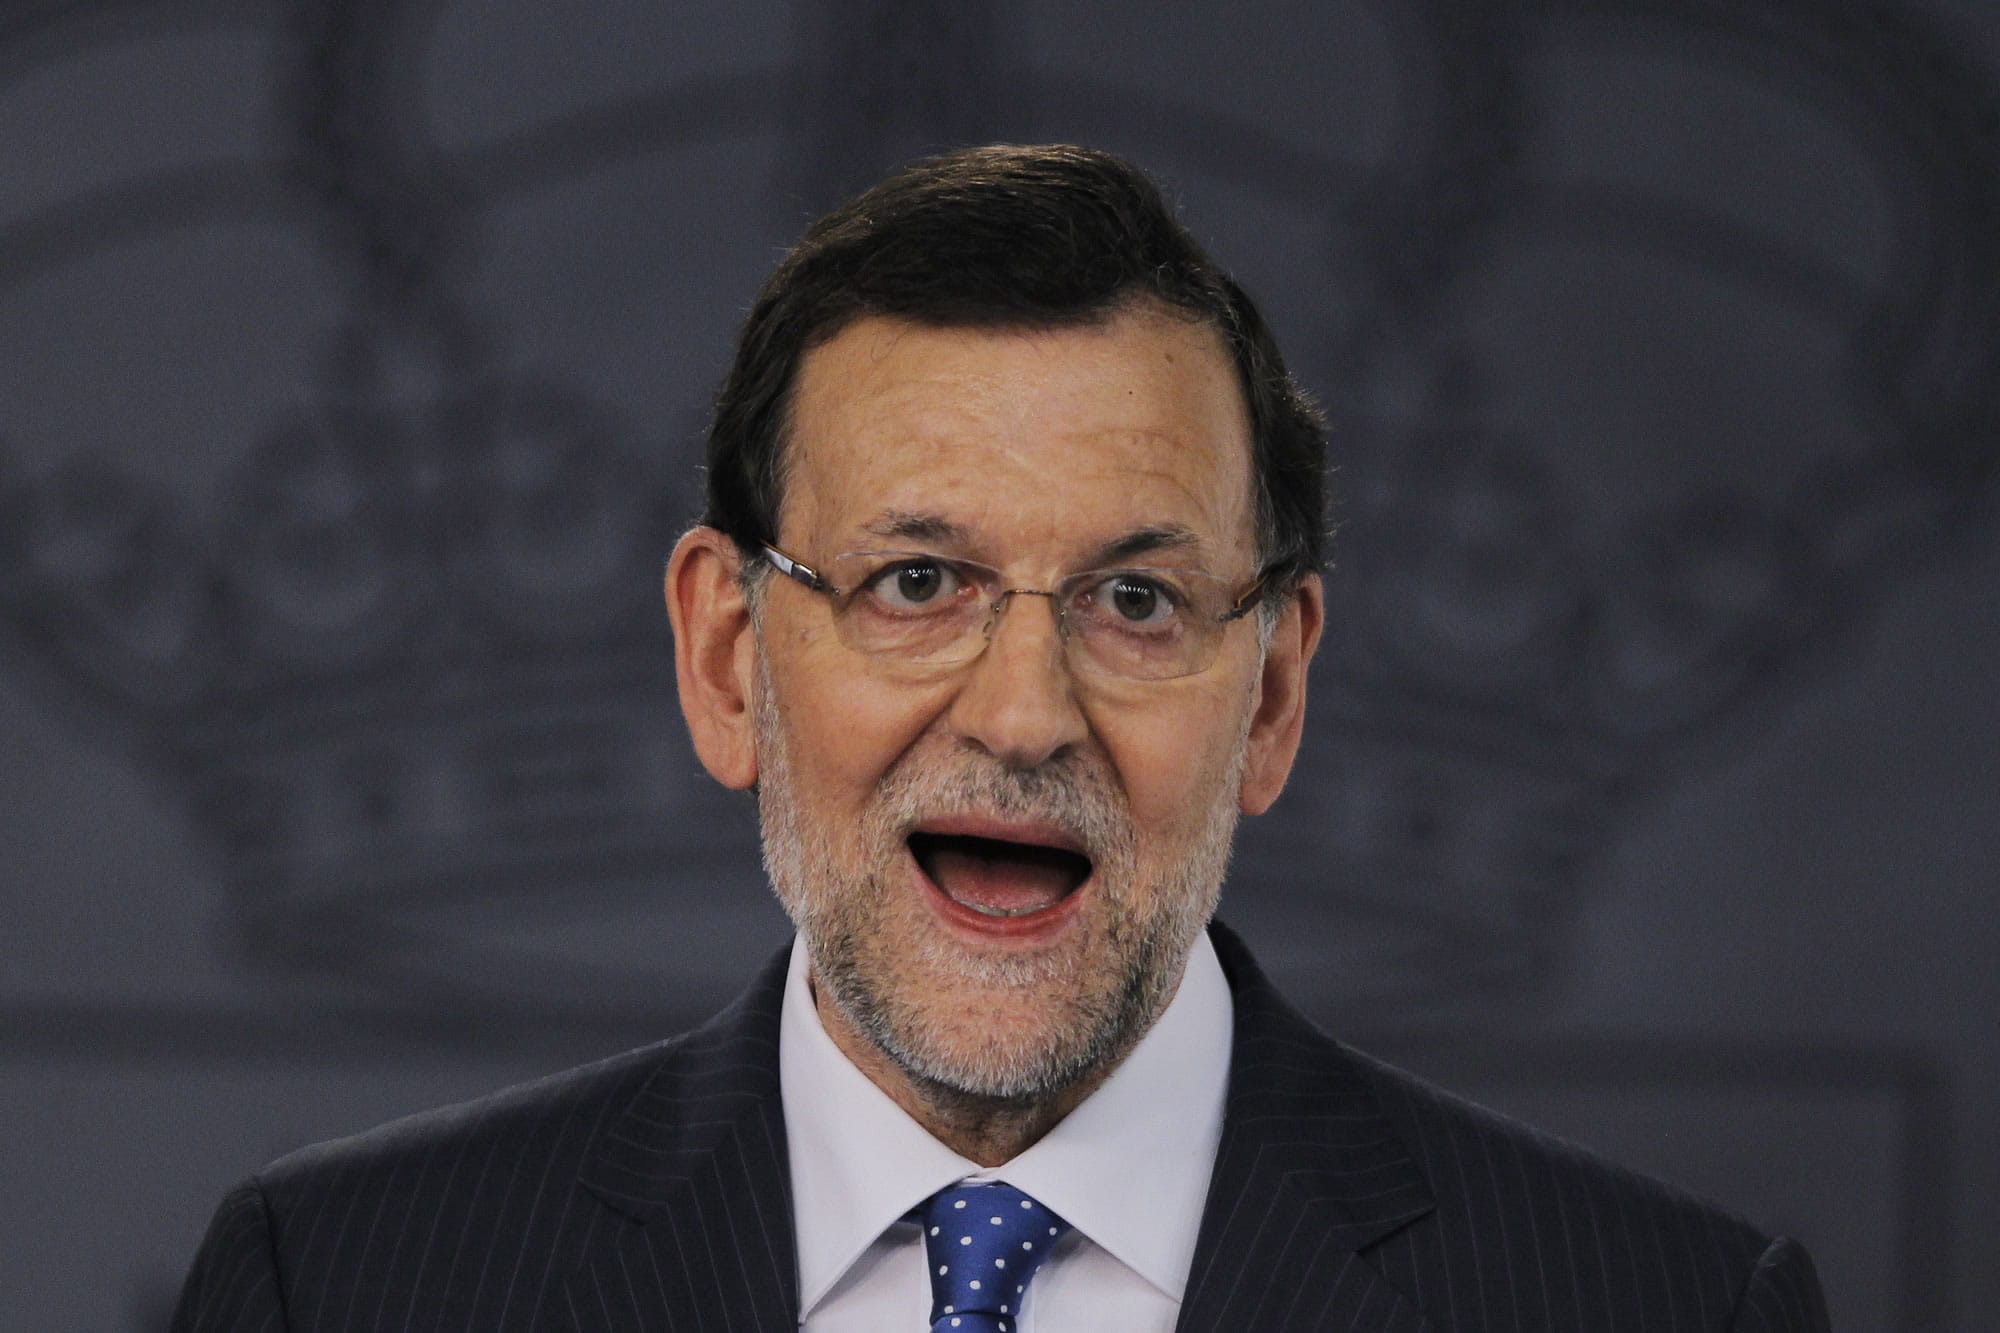 Spain's Prime Minister Mariano Rajoy speaks during a meeting with Poland's Prime Minister Donald Tuskat at the Moncloa Palace in Madrid, Spain, on Monday.